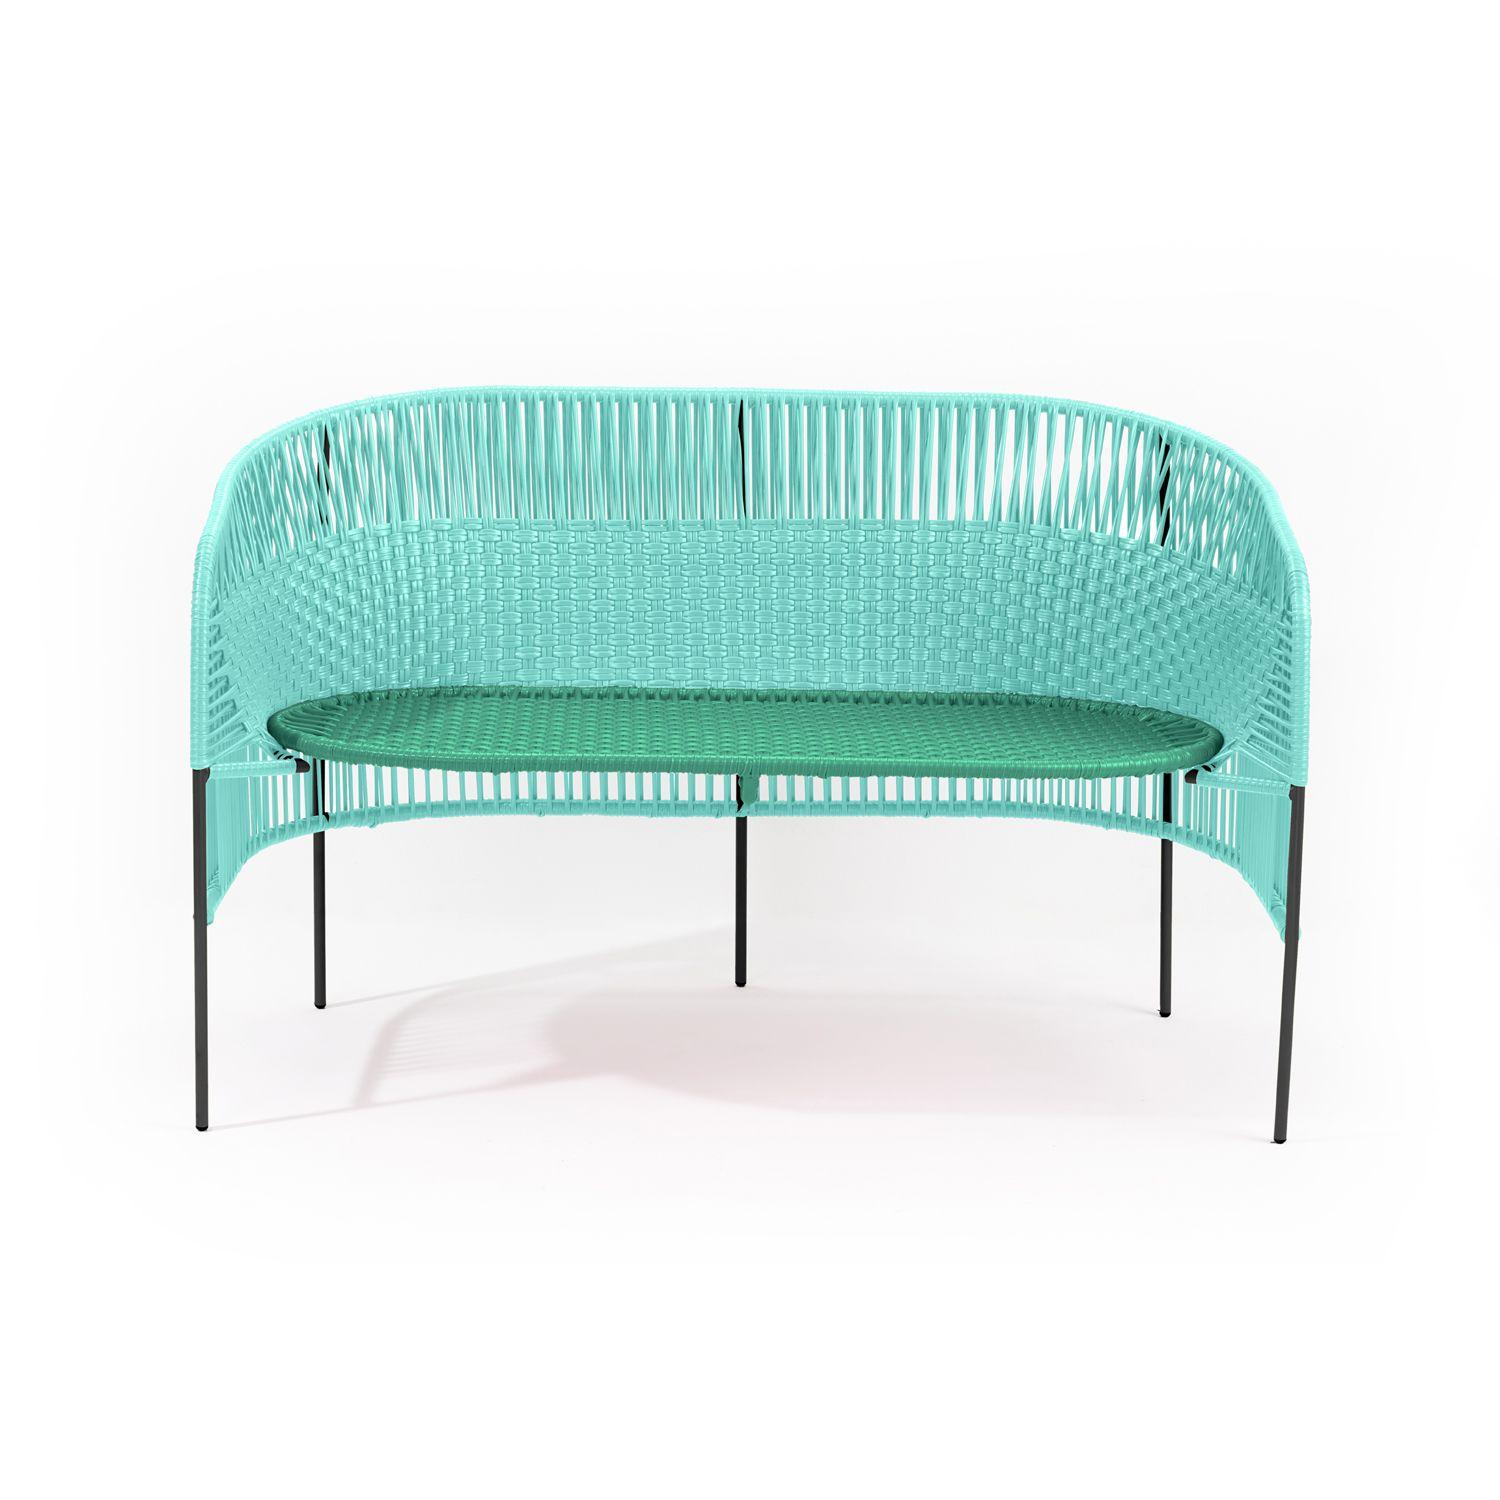 Mint Caribe 2 seater bank by Sebastian Herkner
Materials: Galvanized and powder-coated tubular steel. PVC strings are made from recycled plastic.
Technique: Made from recycled plastic and weaved by local craftspeople in Colombia. 
Dimensions: W